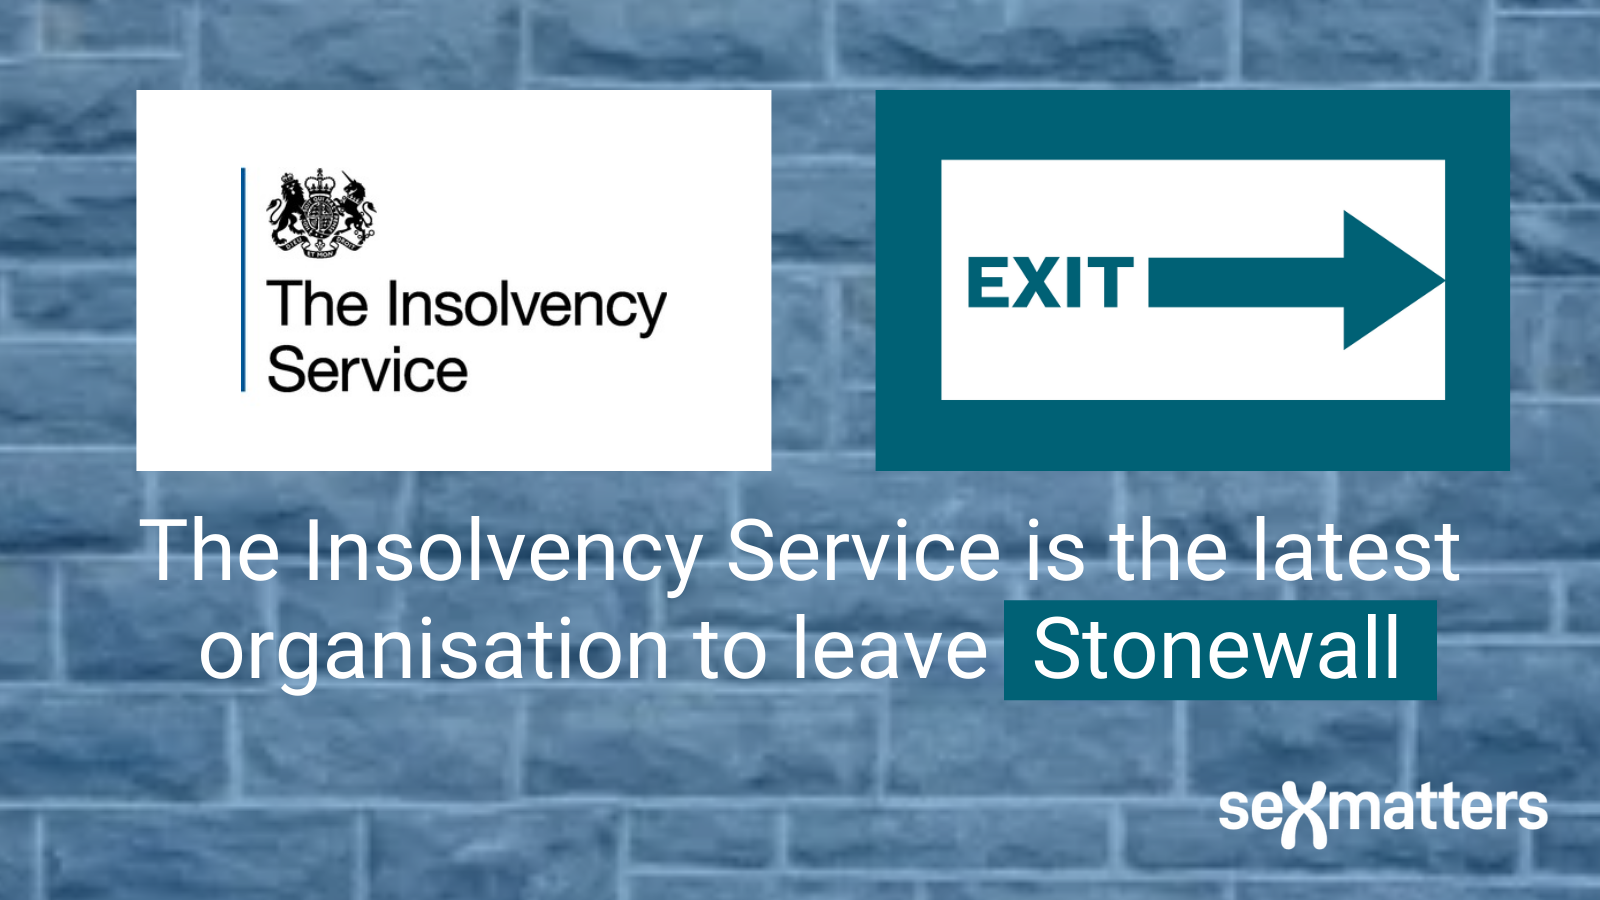 The Insolvency Service is the latest organisation to leave Stonewall